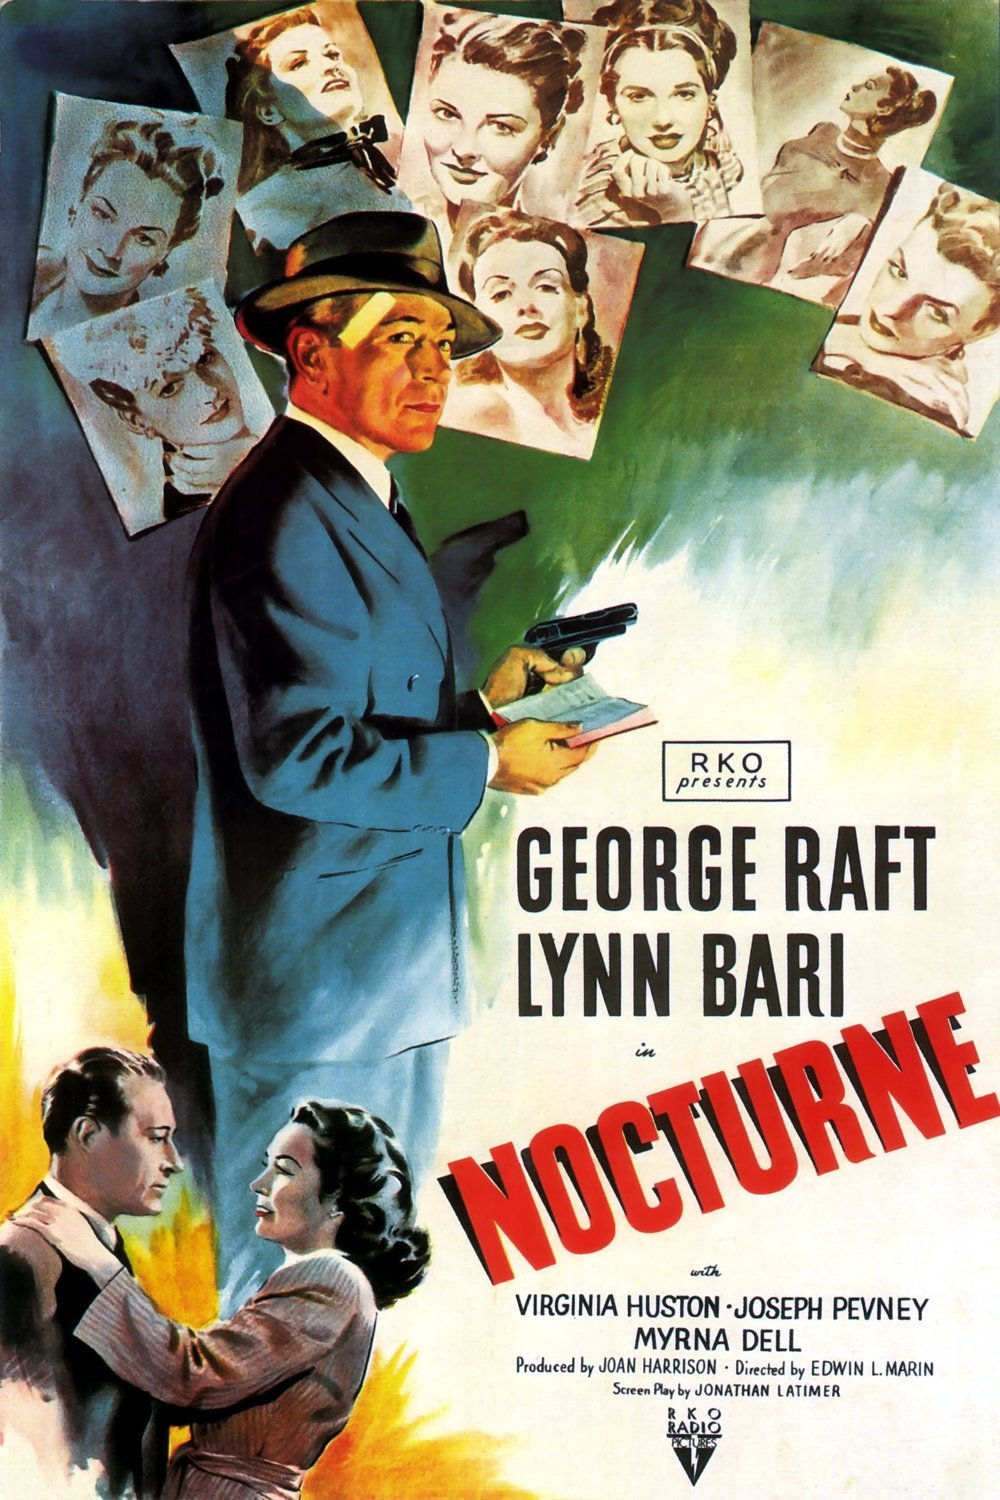 Poster of the movie Nocturne